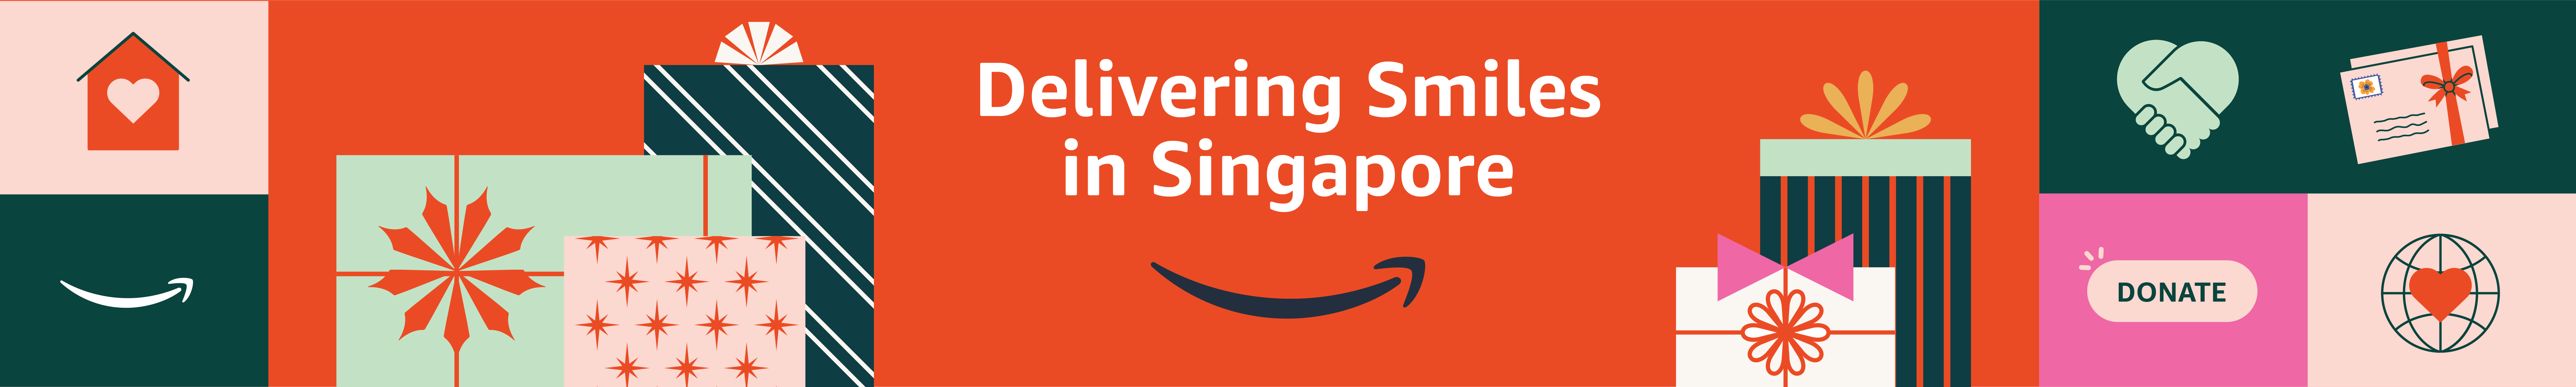 AmazonSG Delivering Smiles Banner